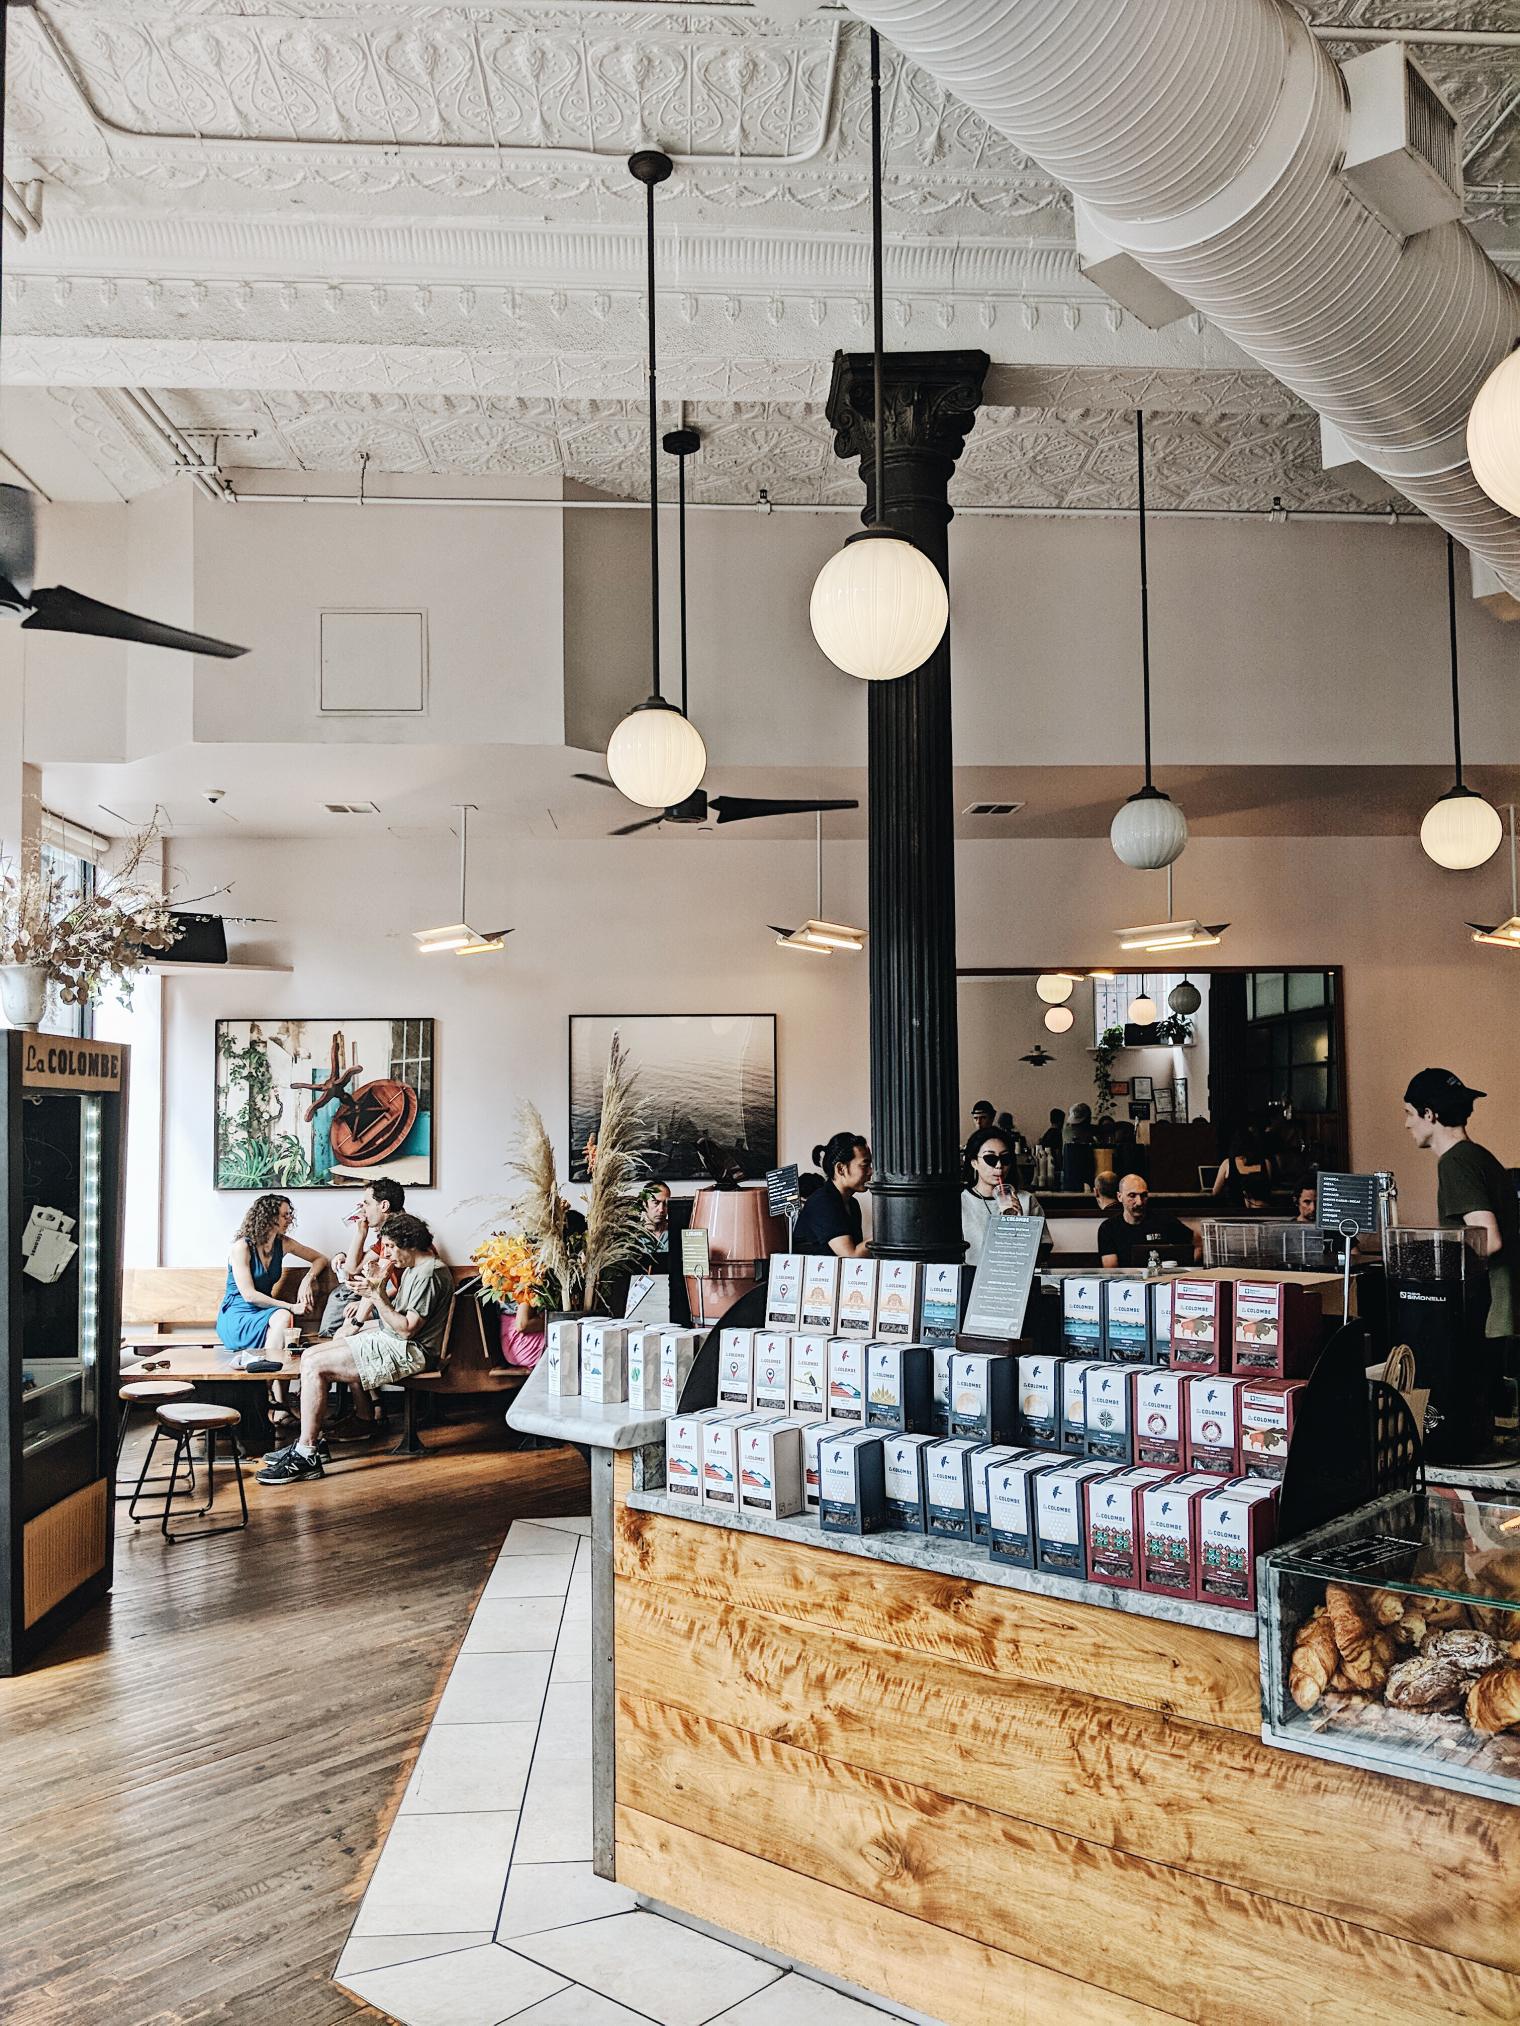 11 Essential Coffee Shops in NYC for Locals & Visitors Alike